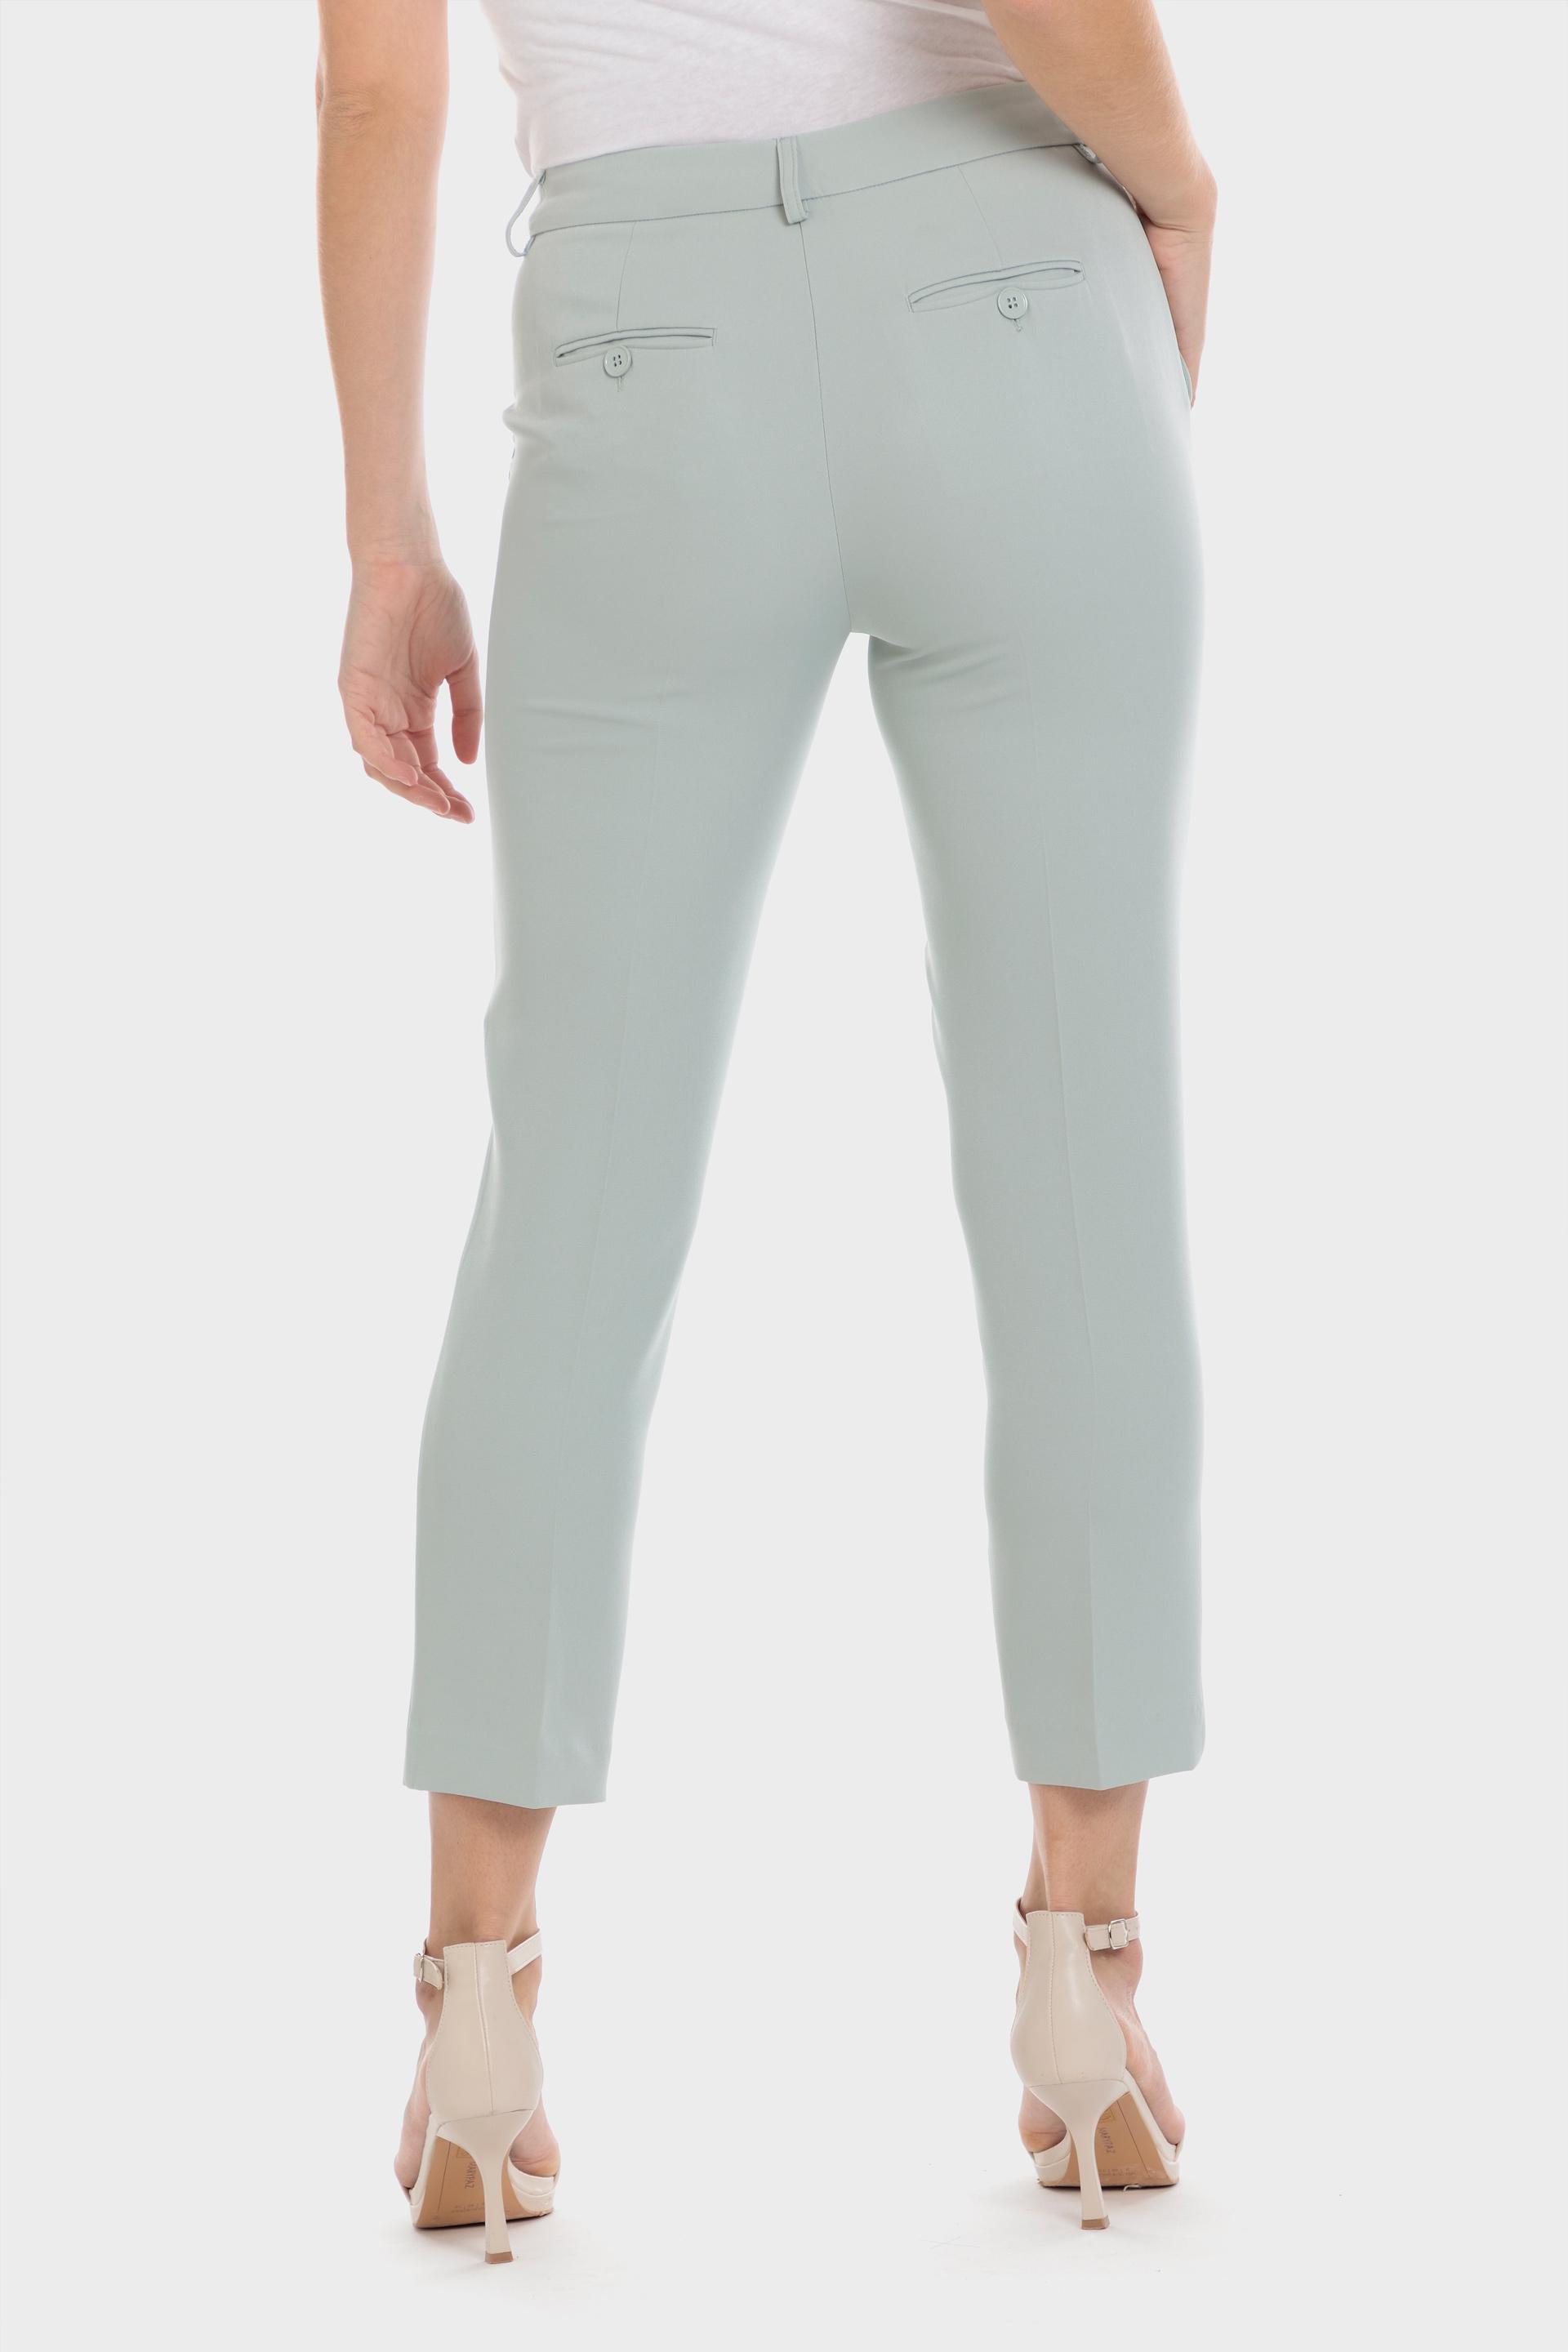 Punt Roma - Green Straight Fit Trousers